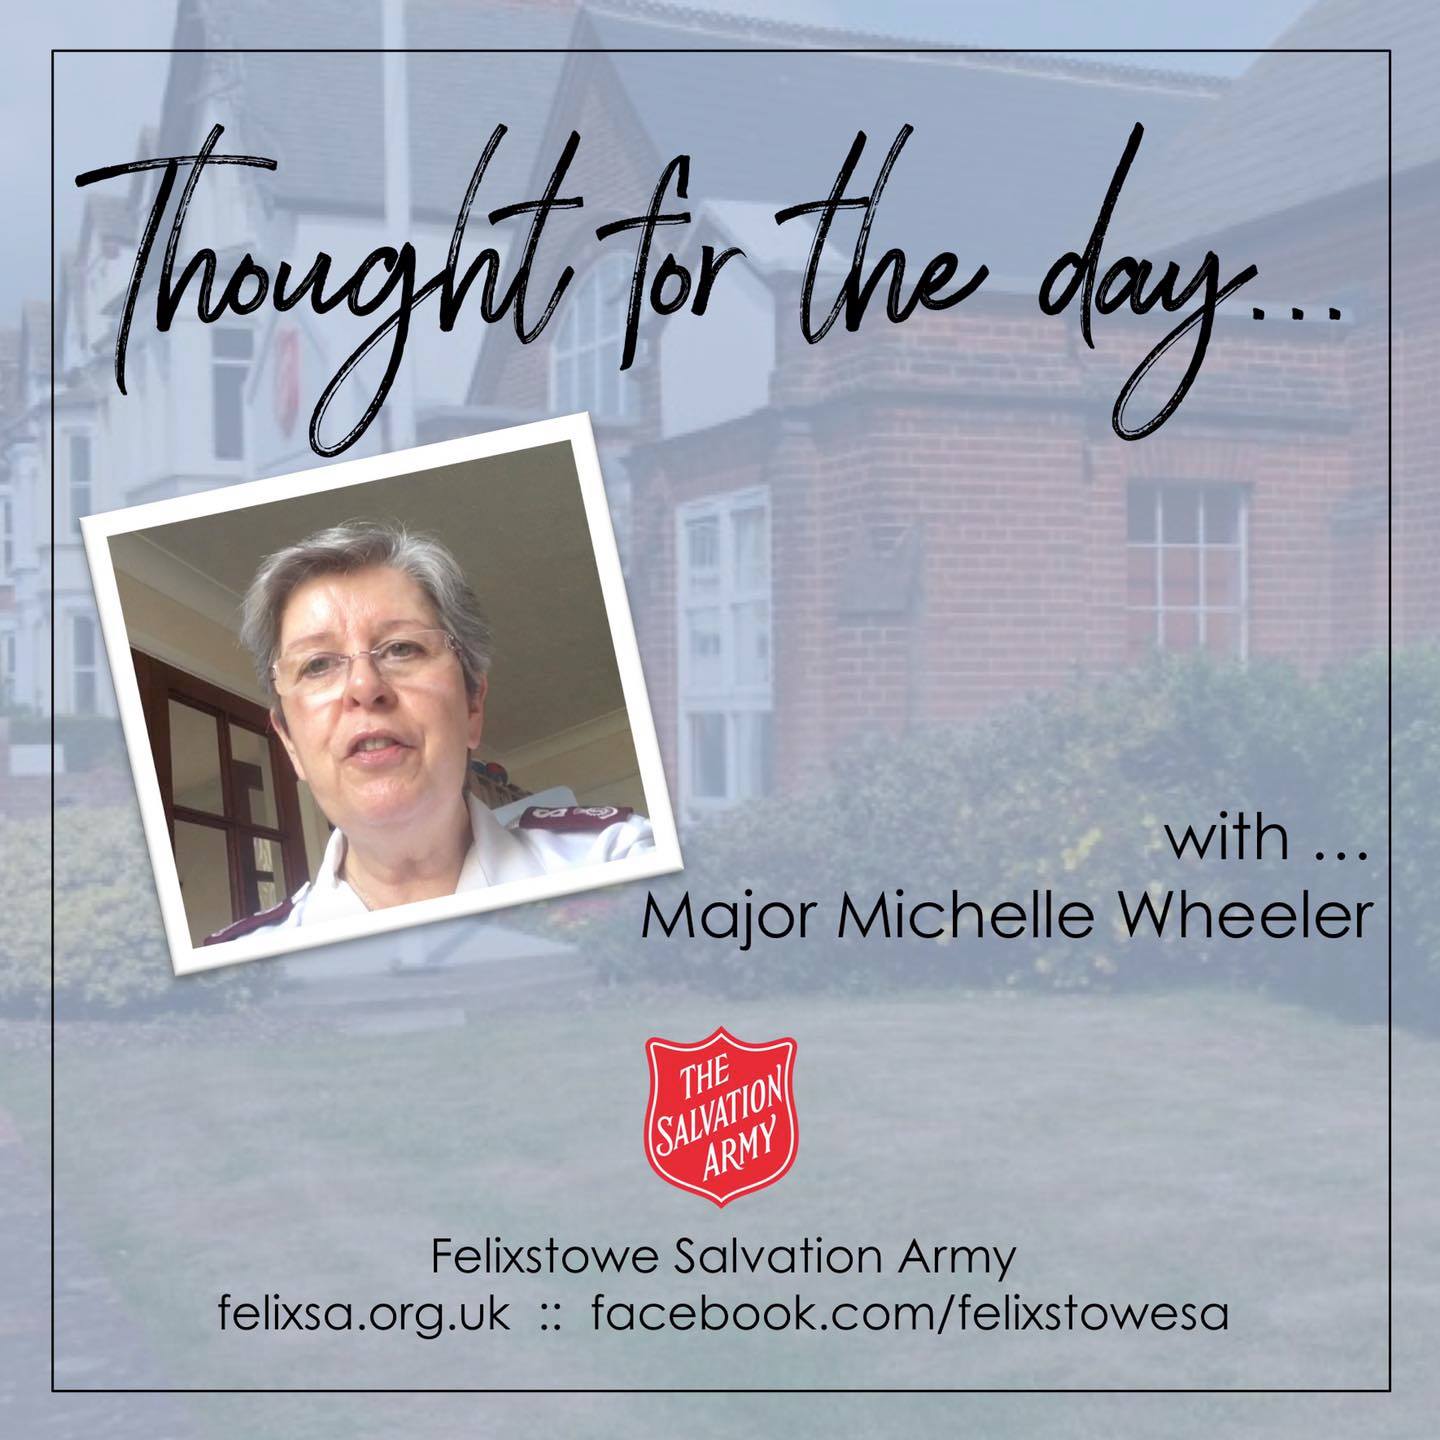 Thought for the Day with Major Michelle Wheeler